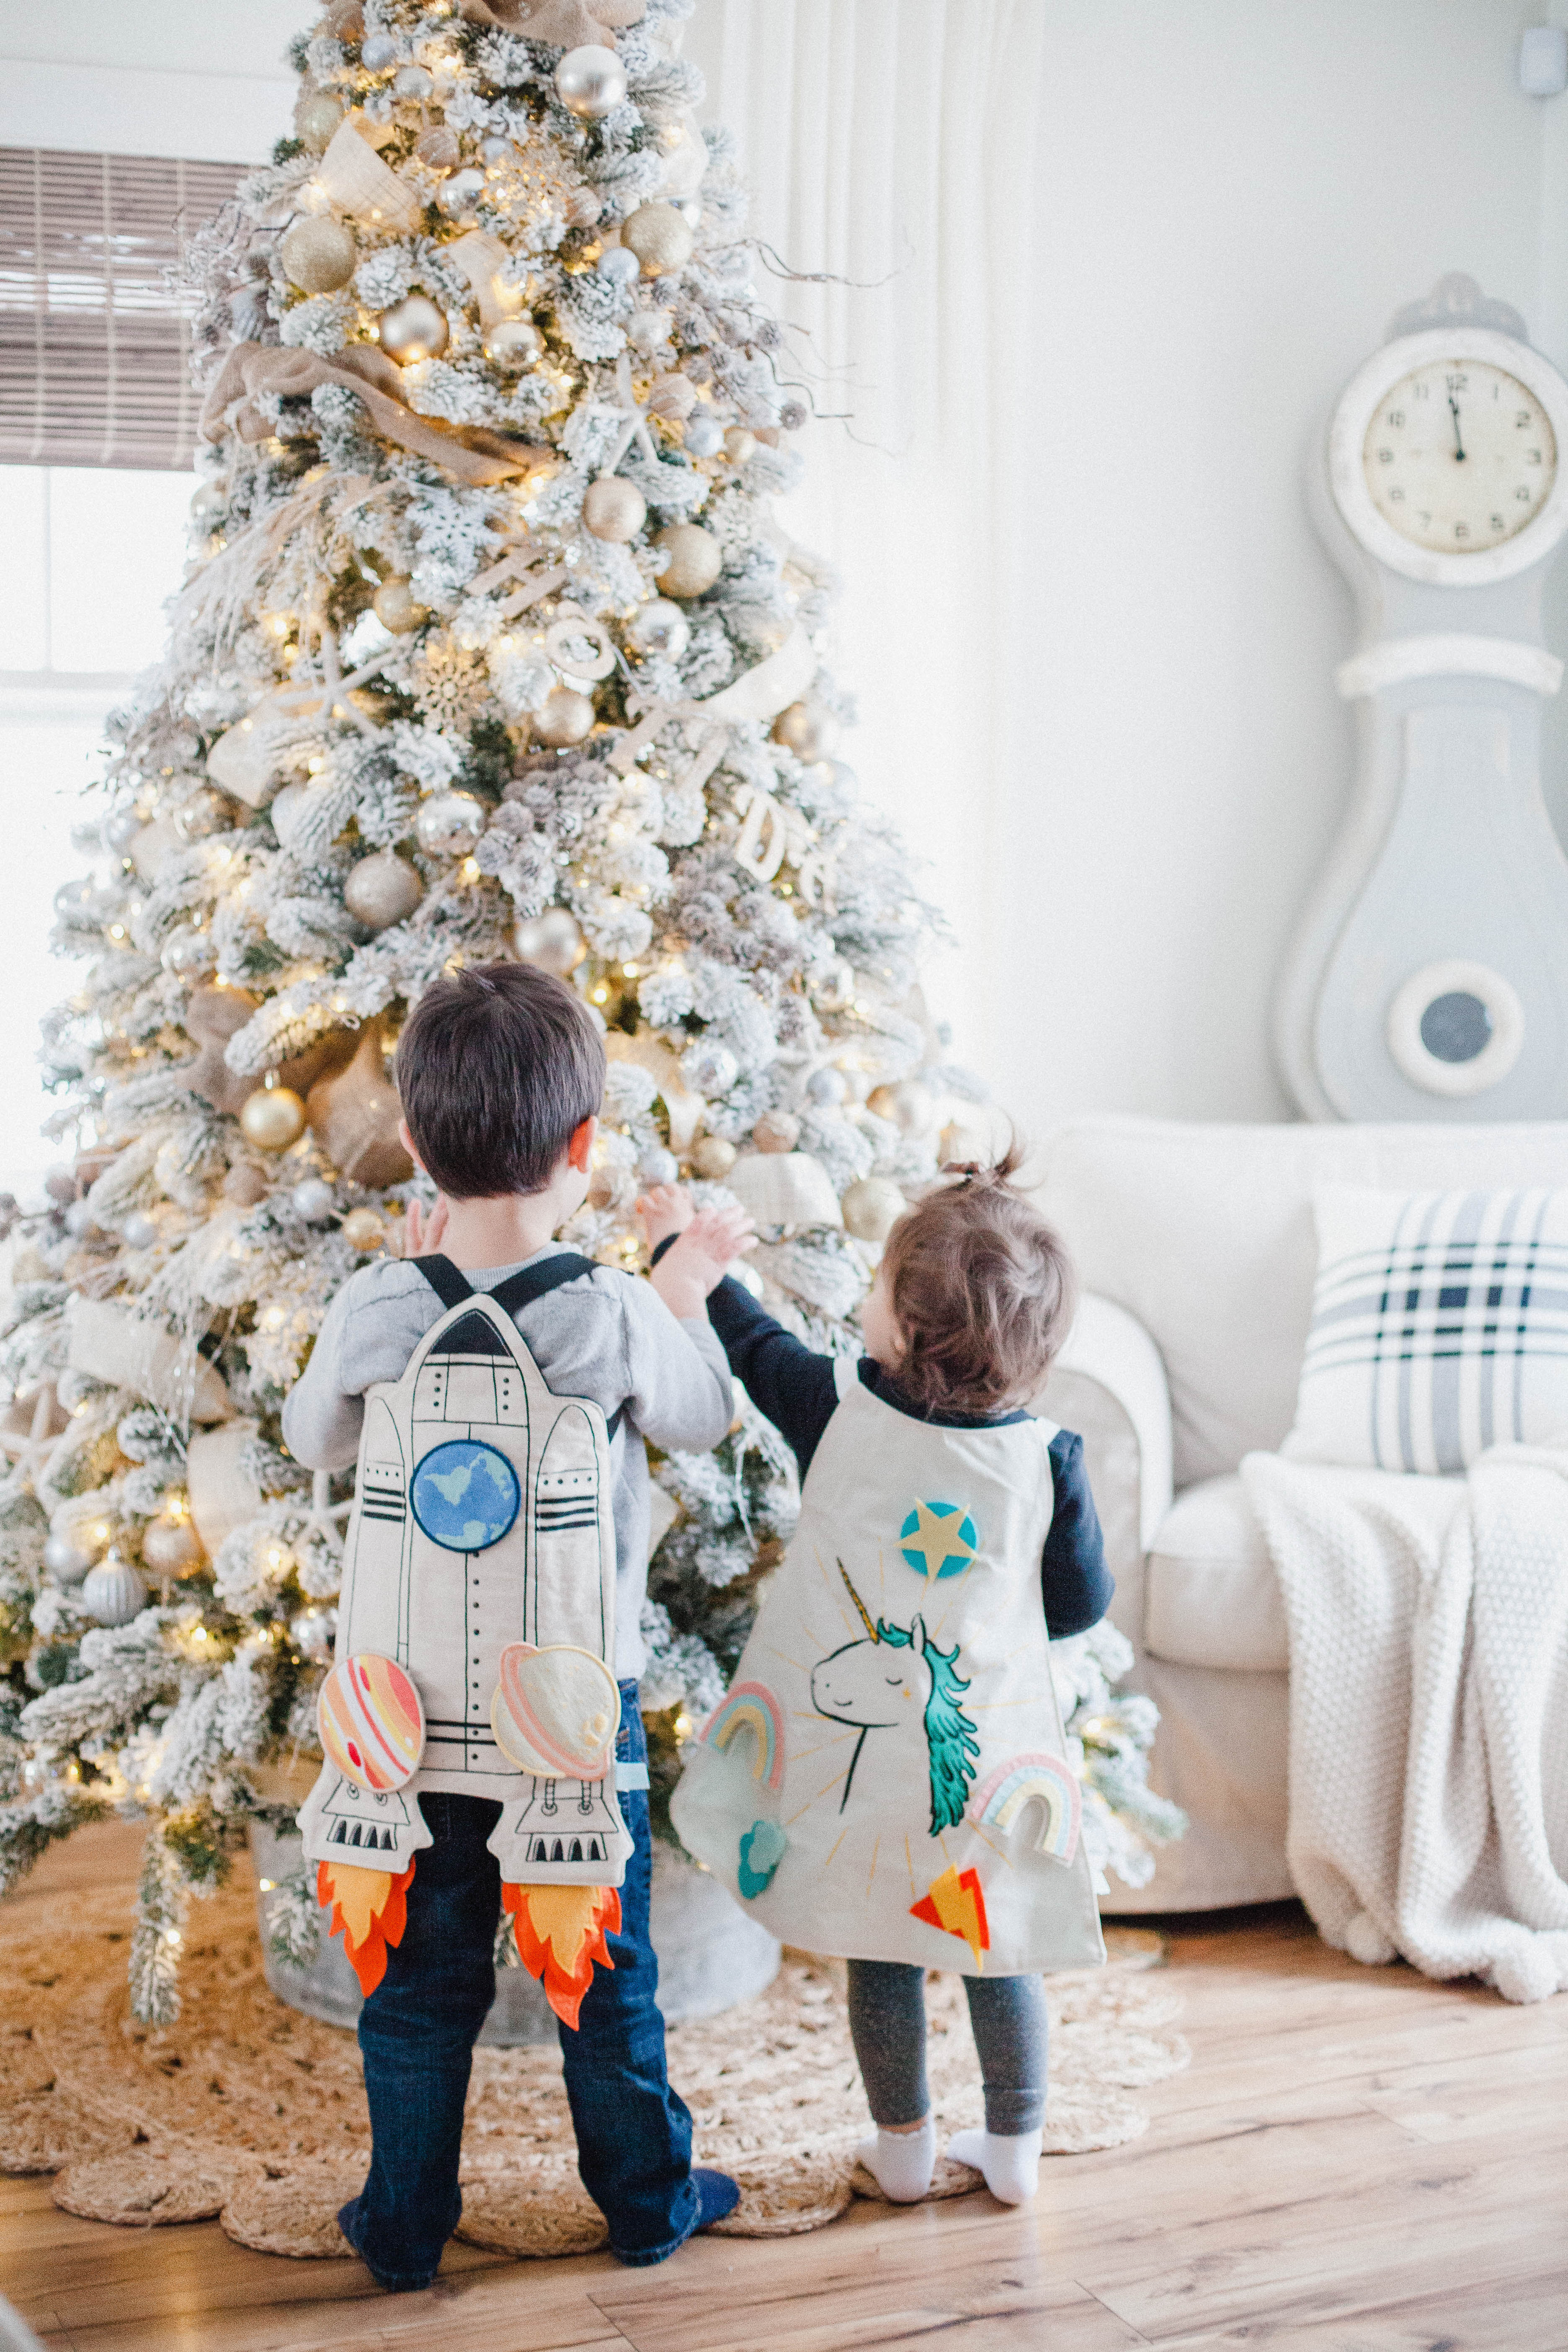 Life and style blogger Lauren McBride shares Holiday Gifts for Kids Under $50 that will promote and encourage imaginative play. 